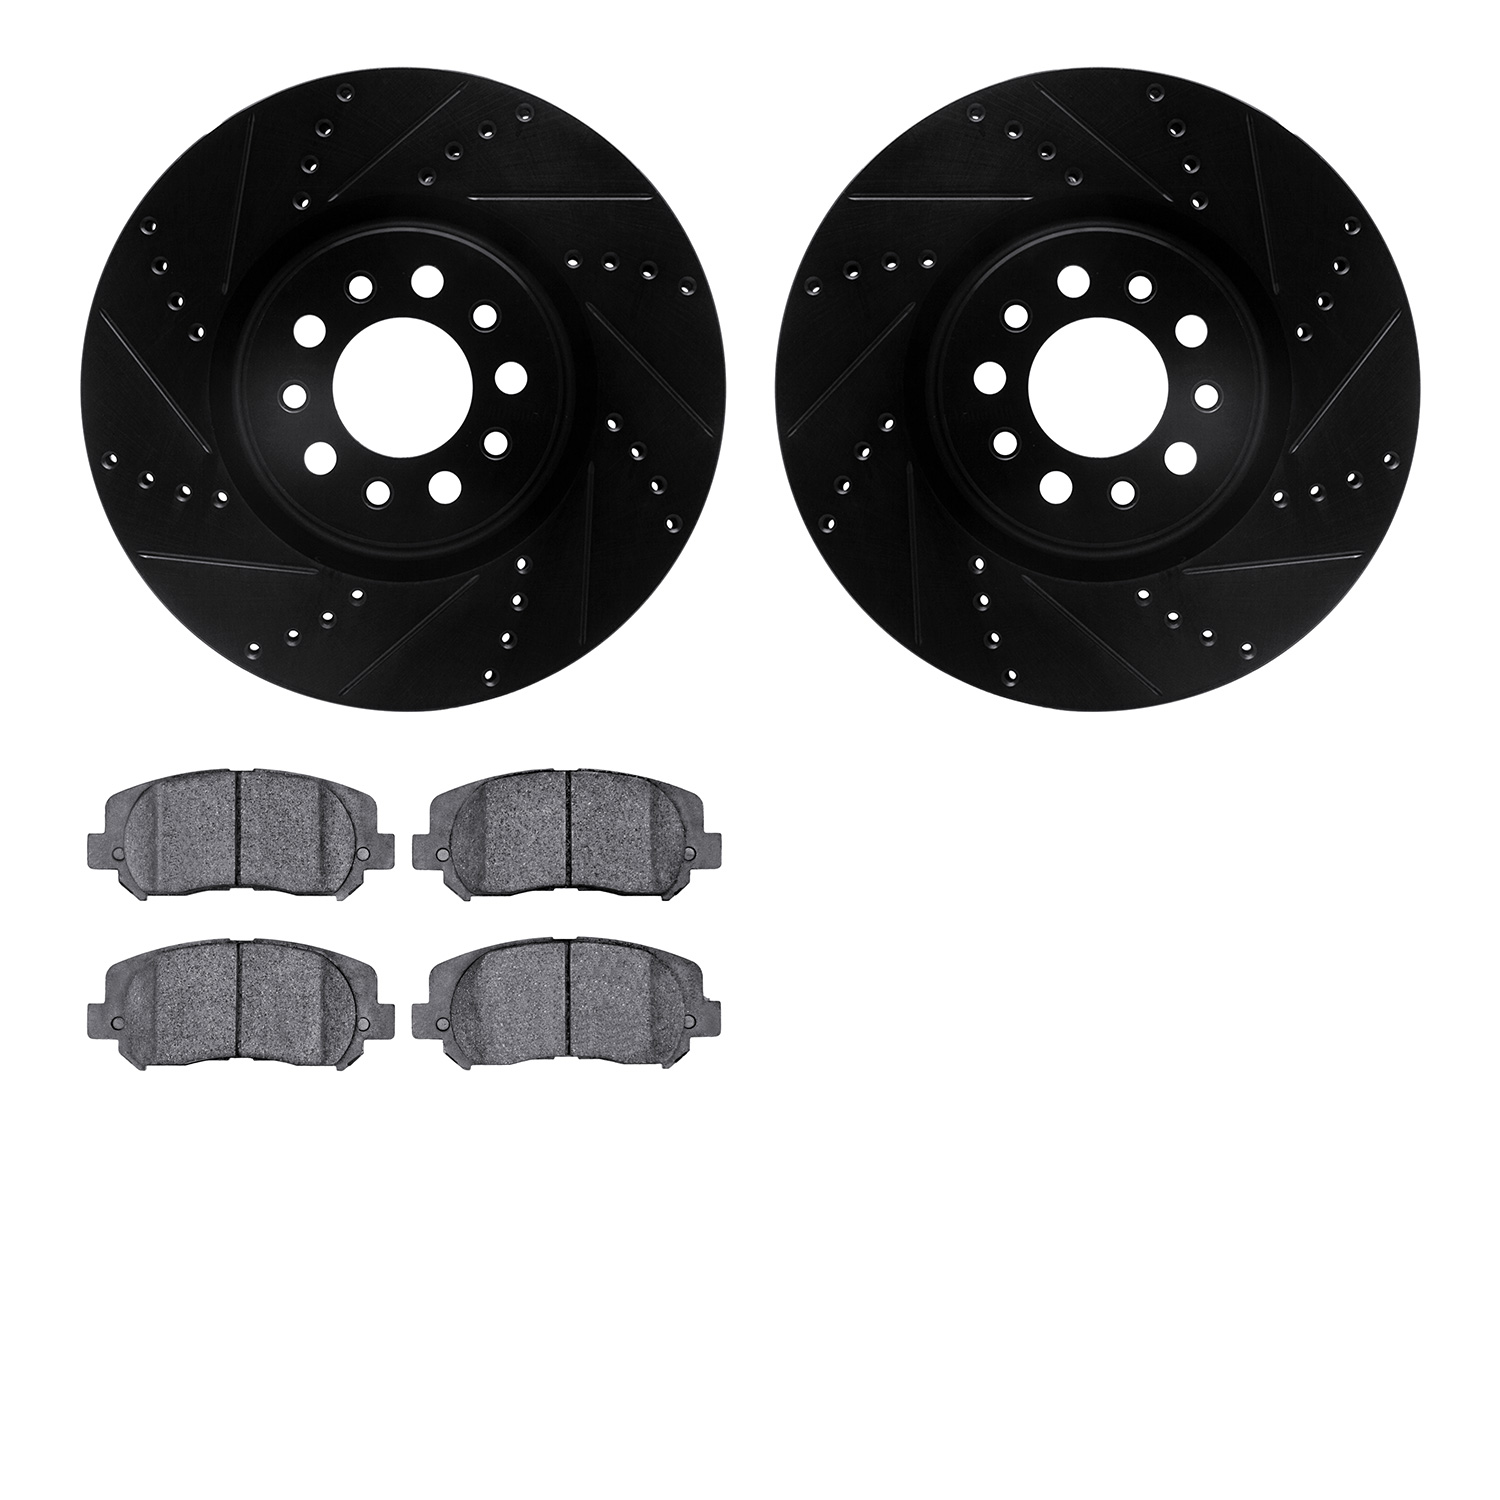 8402-42014 Drilled/Slotted Brake Rotors with Ultimate-Duty Brake Pads Kit [Black], Fits Select Mopar, Position: Front